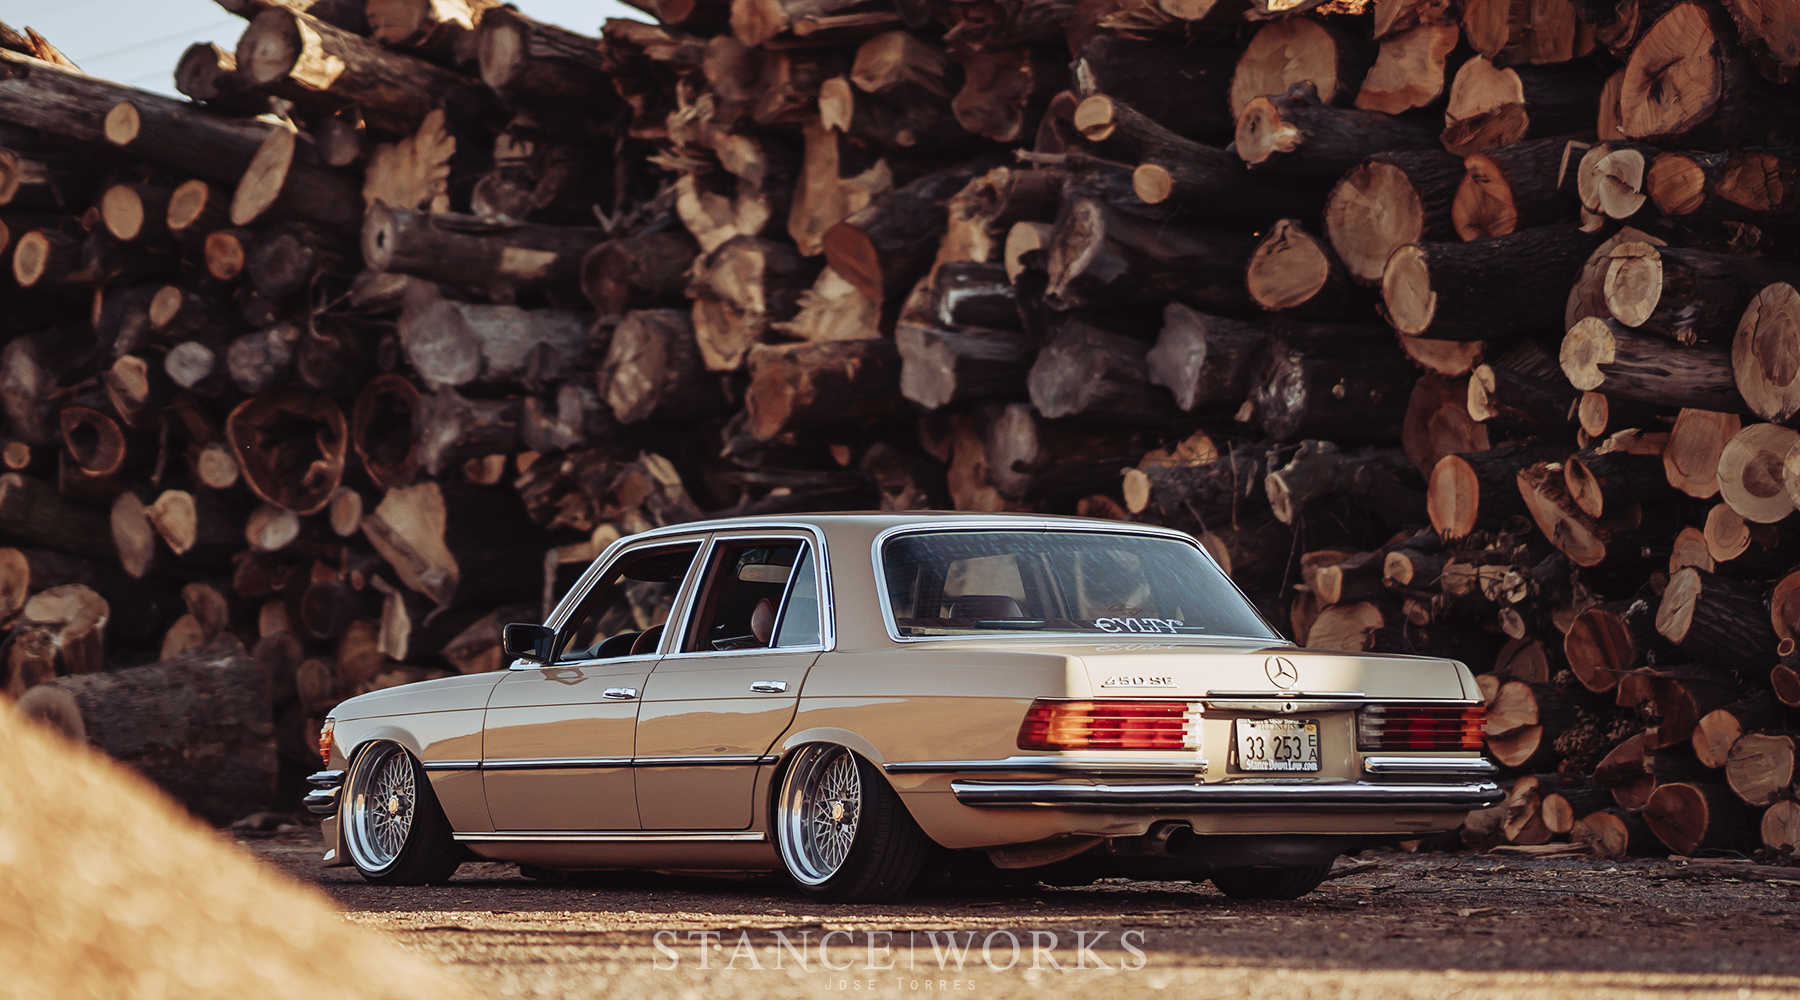 The King of Rollers – Jose Torres's 1973 Mercedes W116 450SE – StanceWorks